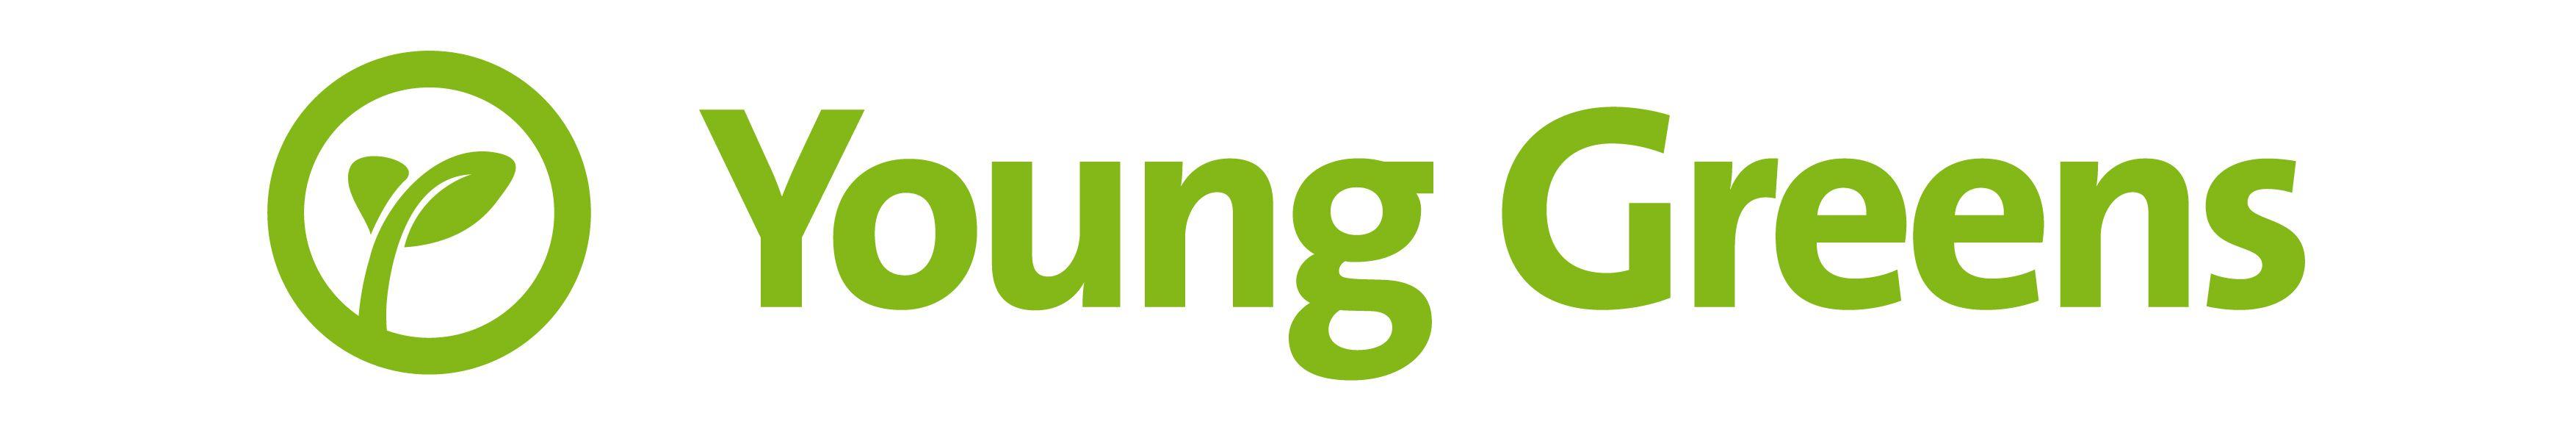 College Greens Logo - South East Essex Green Party